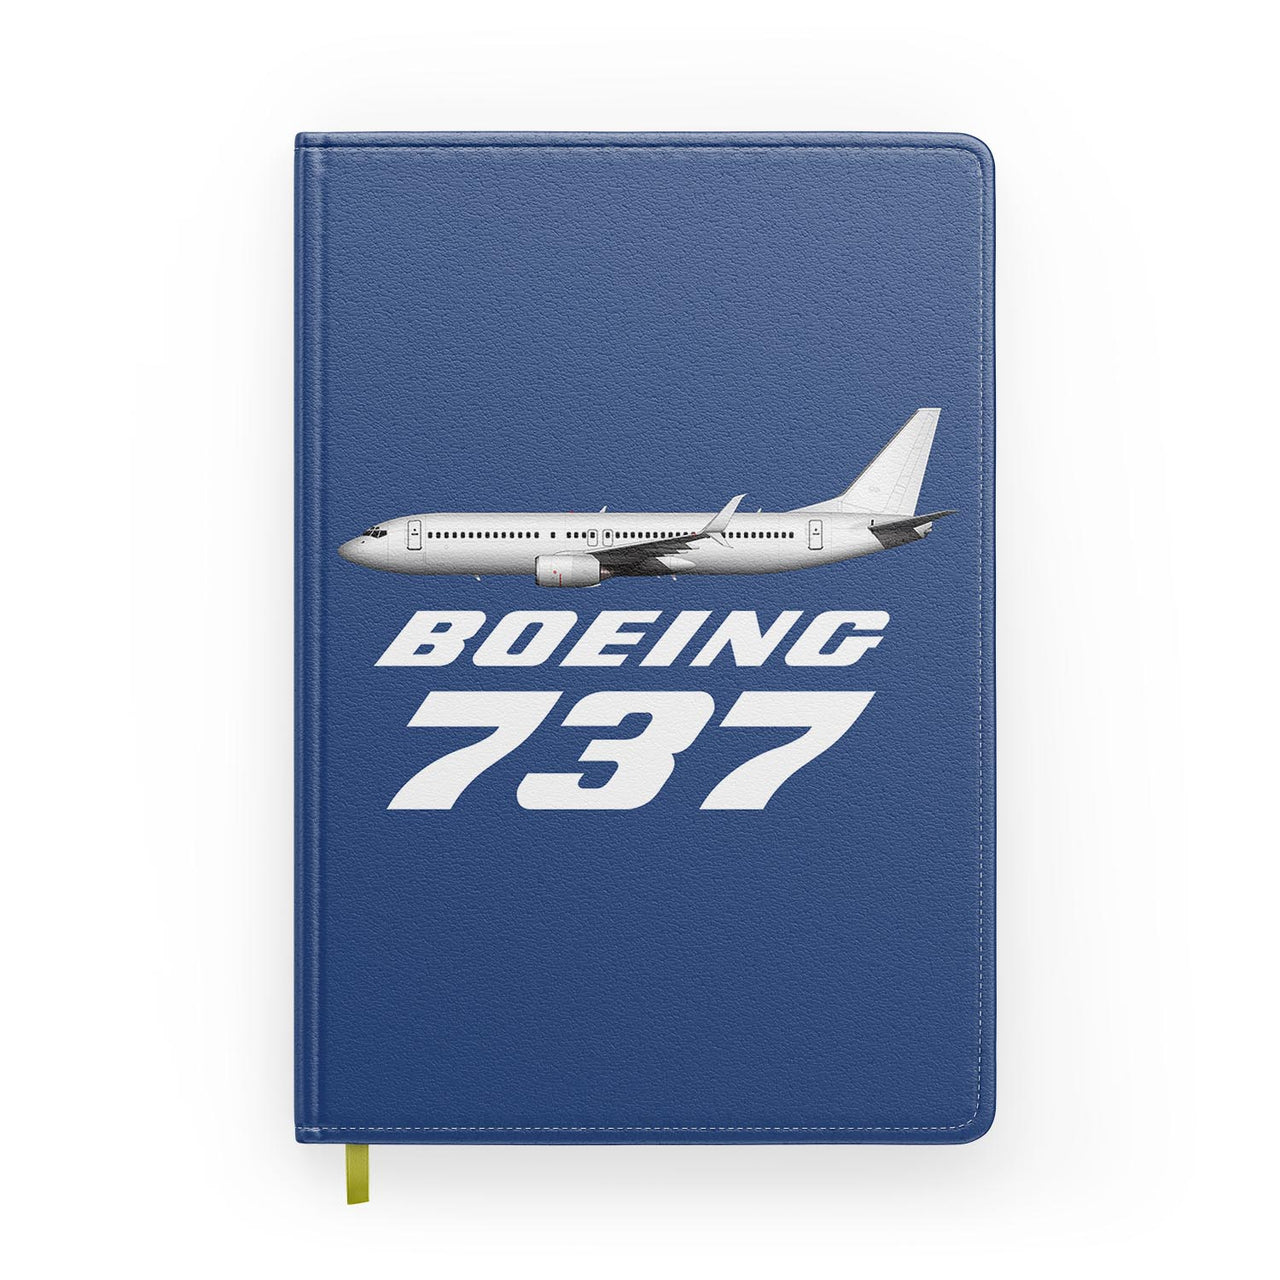 The Boeing 737 Designed Notebooks